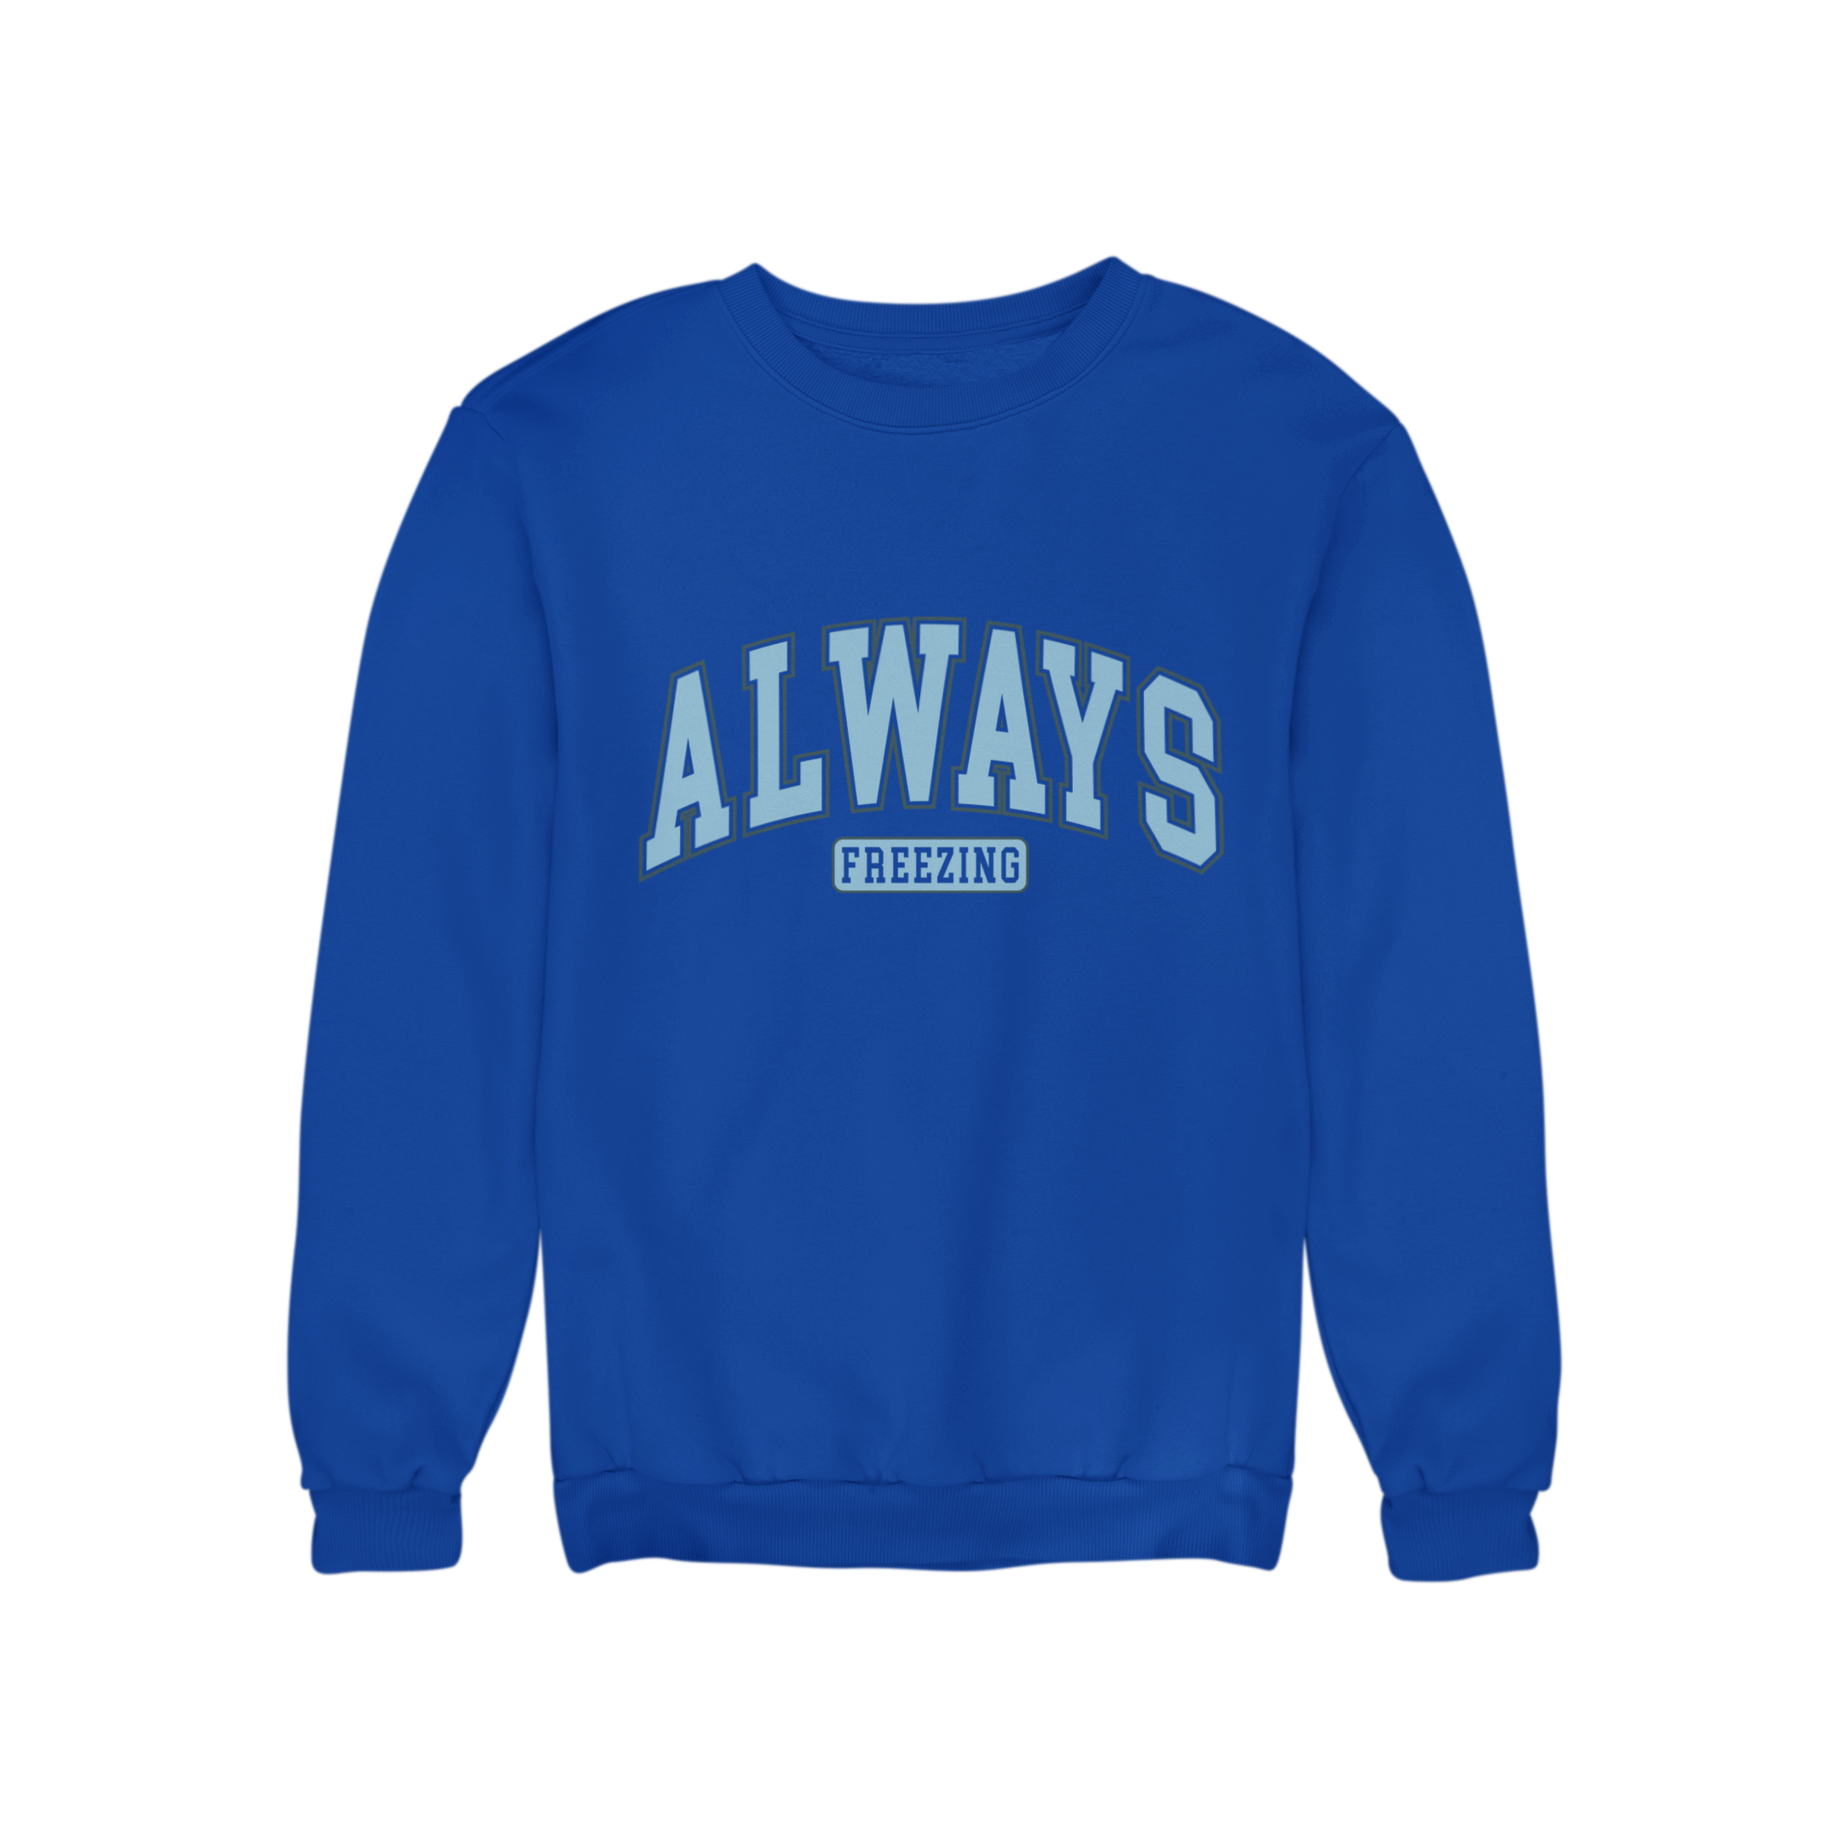 Stay warm with the Always Freezing sweatshirt. This stylish piece of apparel features a slogan emblem that provides a clever reminder to layer up in cold weather. With its soft material and comfortable fit, you'll be comfortably snug all season long.